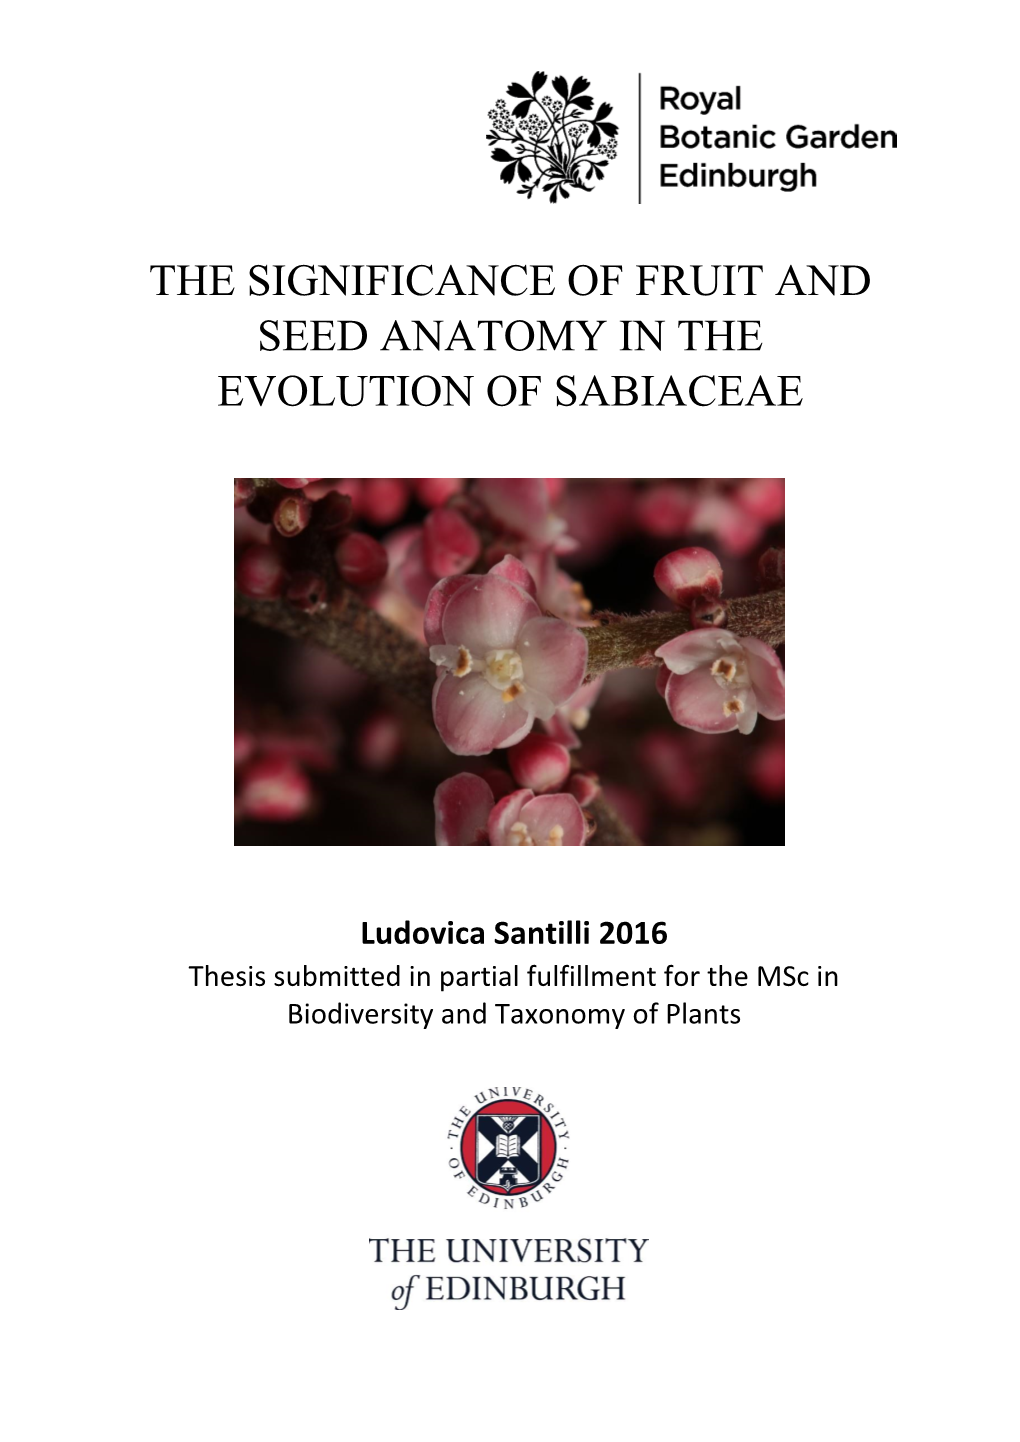 The Significance of Fruit and Seed Anatomy in the Evolution of Sabiaceae